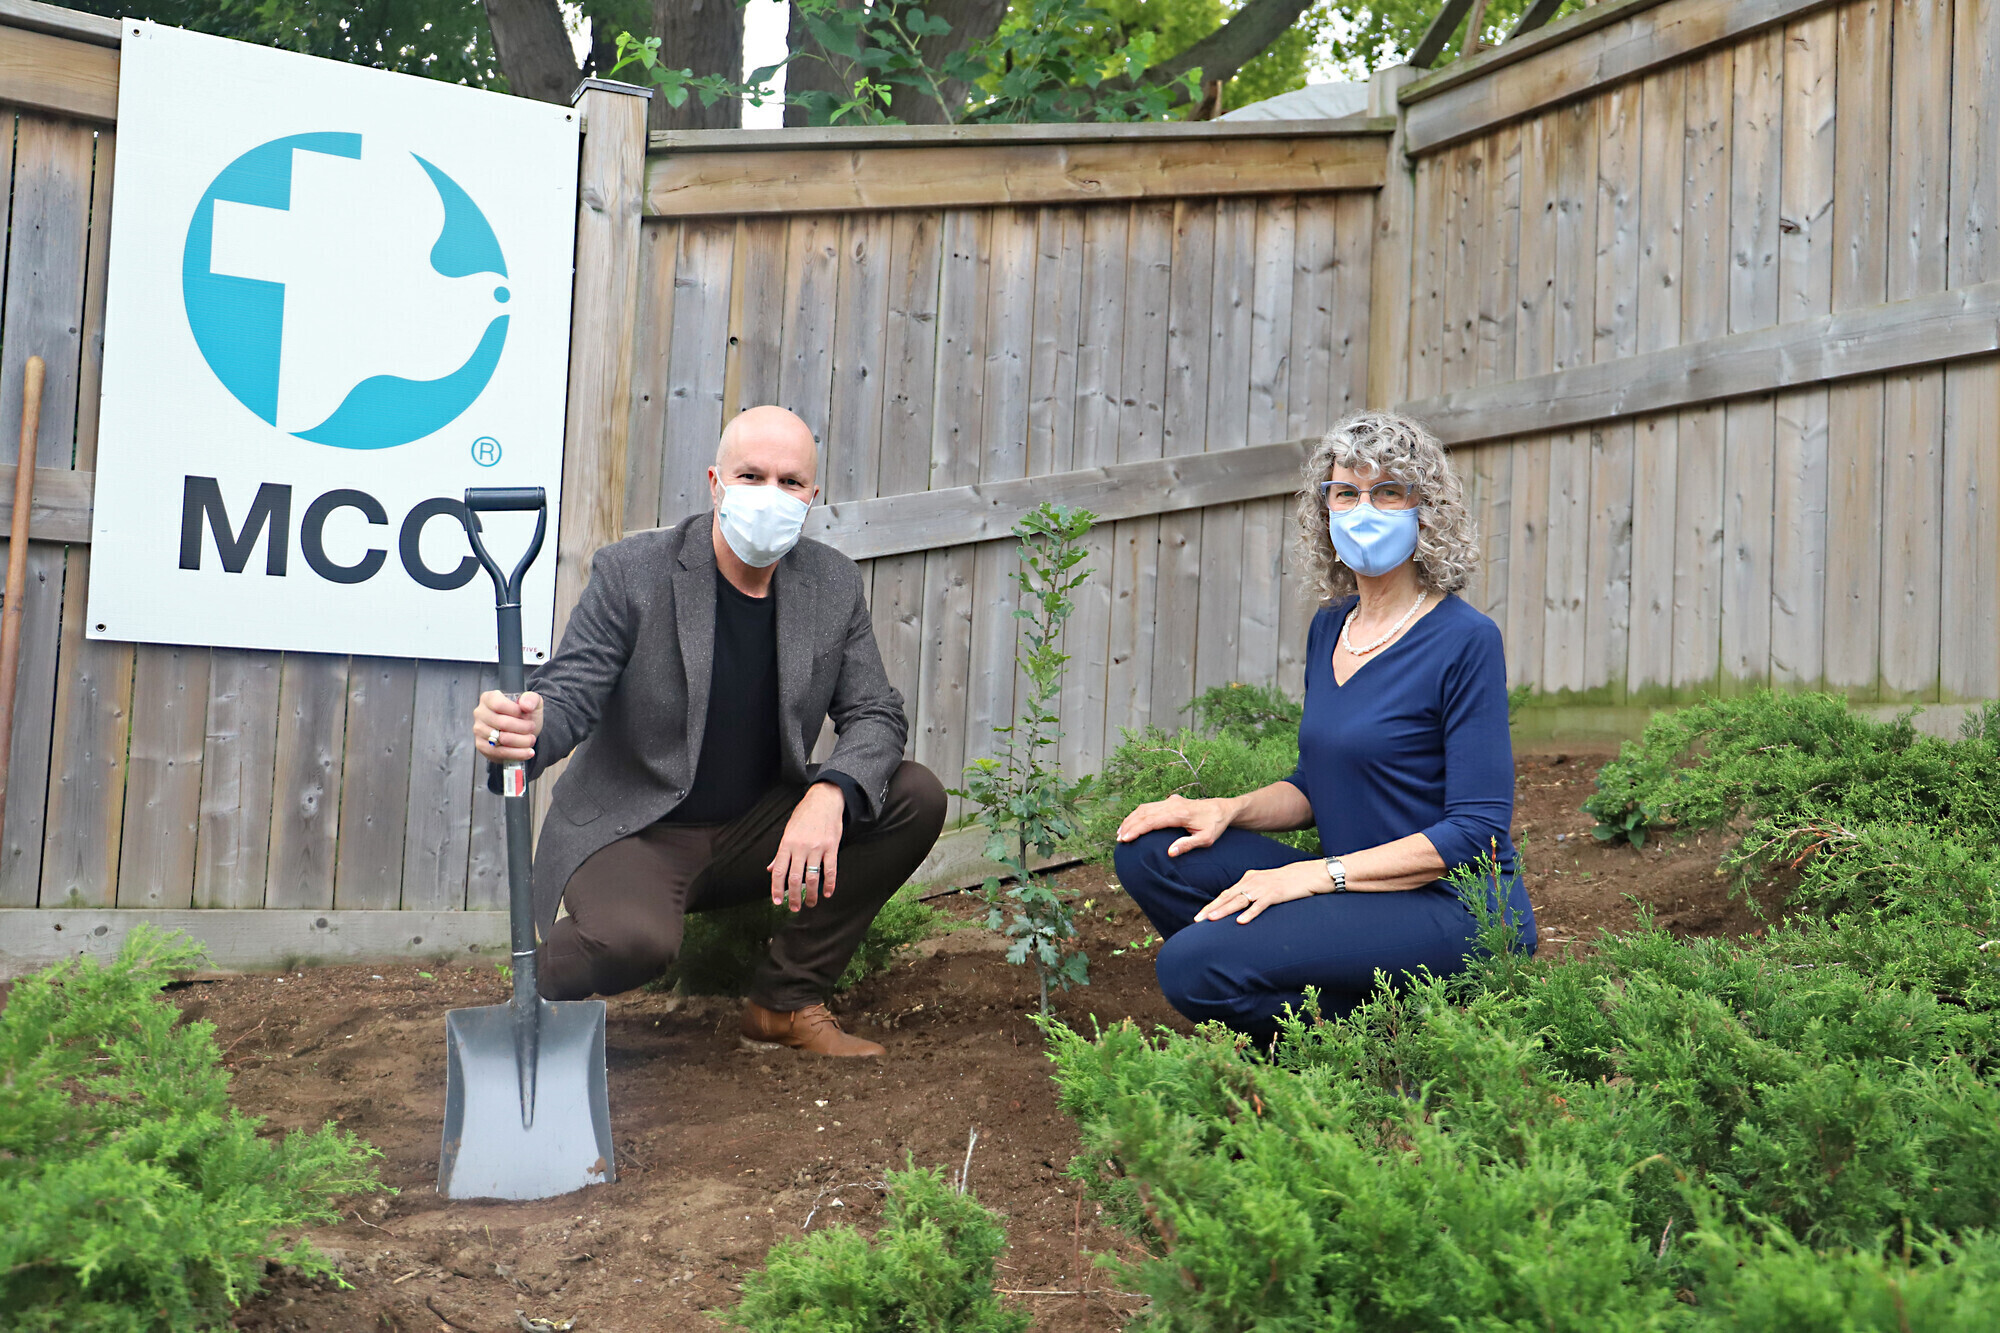 A man and woman planting a tree in front of an MCC sign